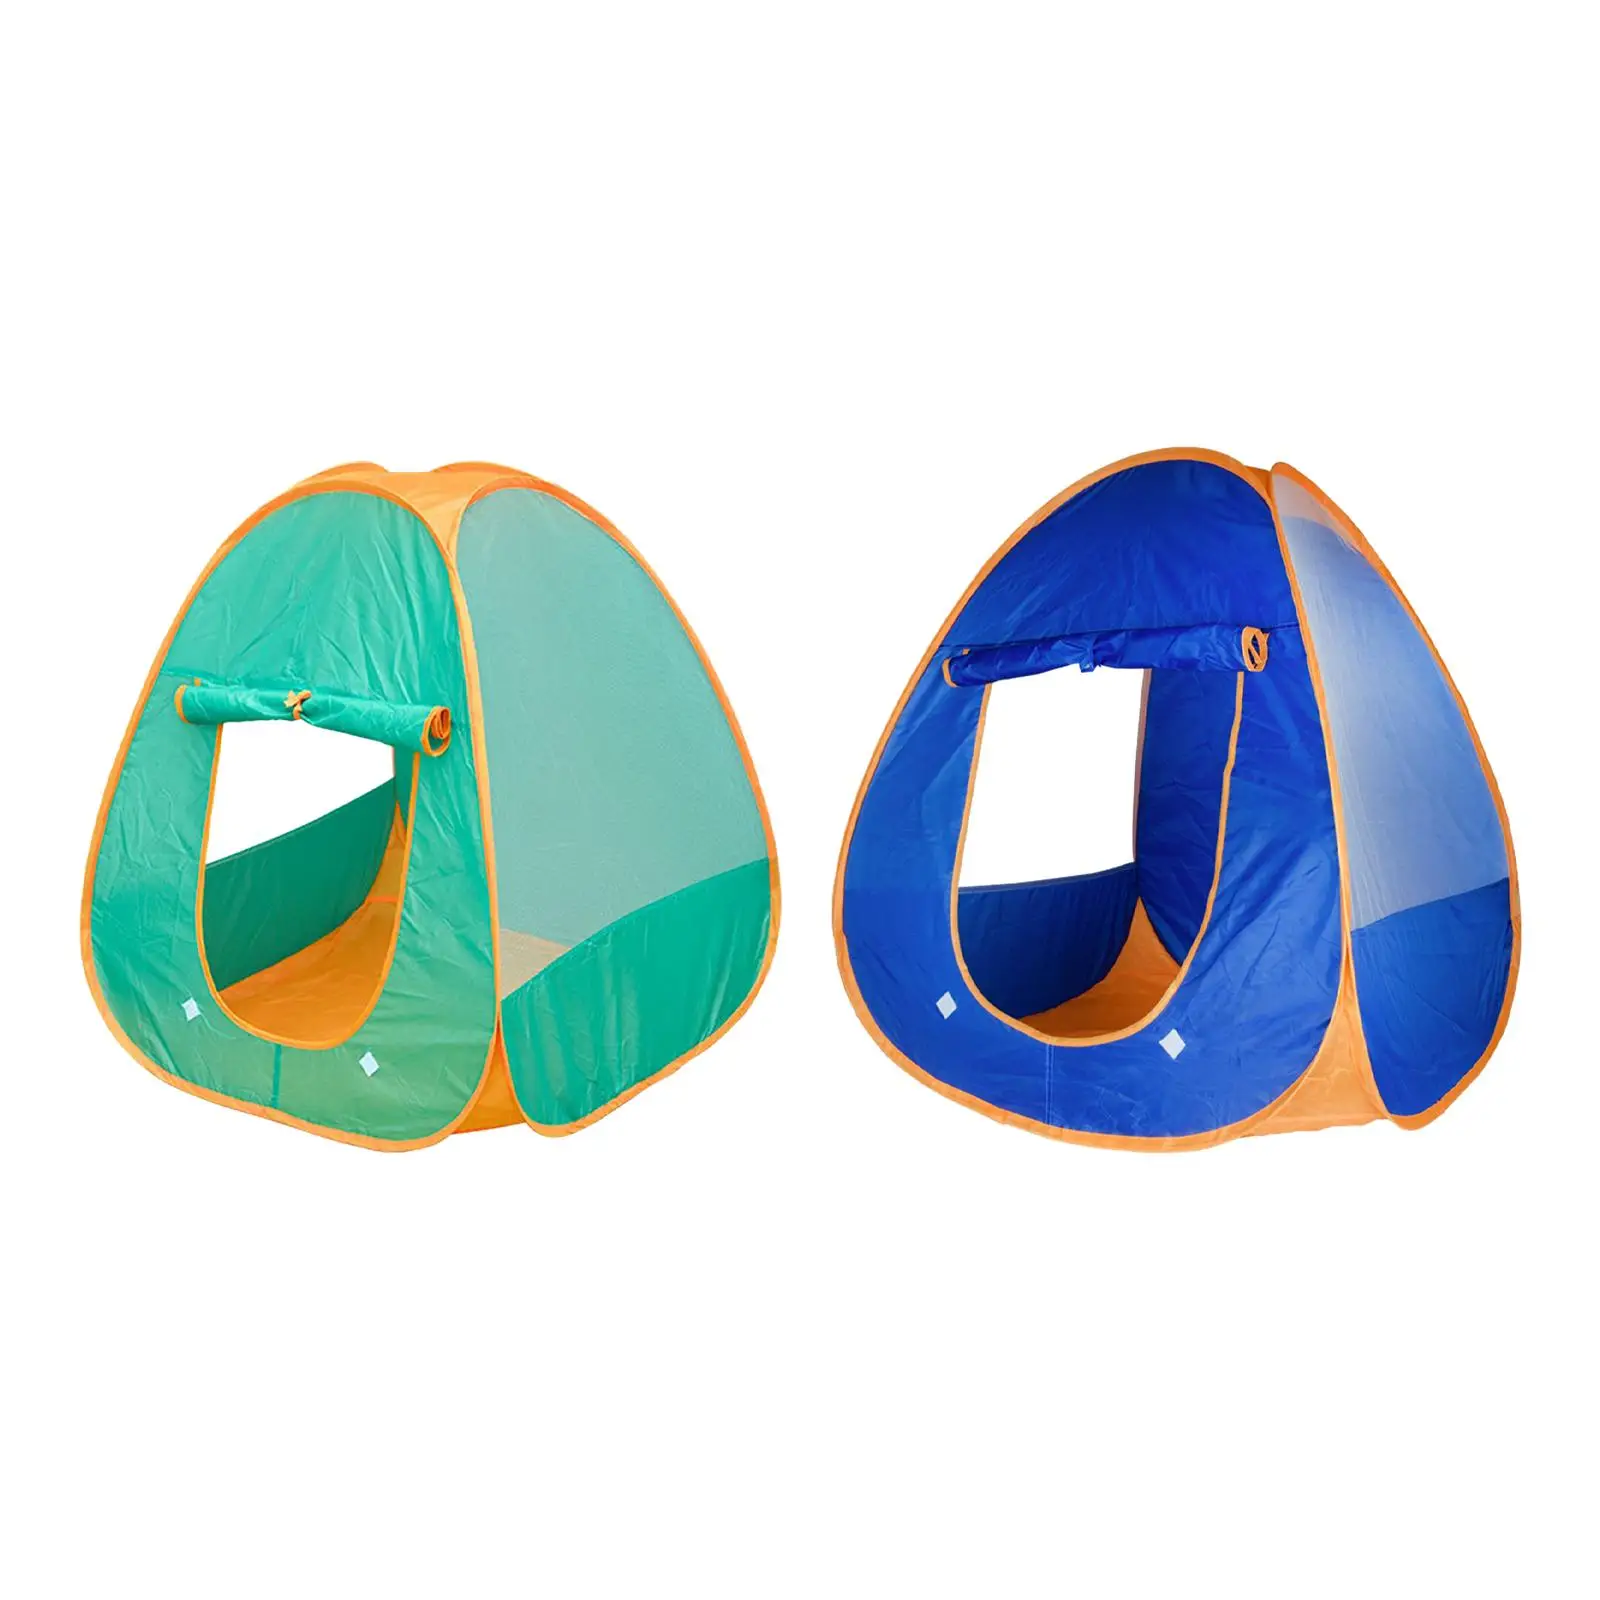 Children Play Tent Foldable Play Mat Pretend Play Lightweight Child Room Decor for Game Nursery Room Beach Party Camping